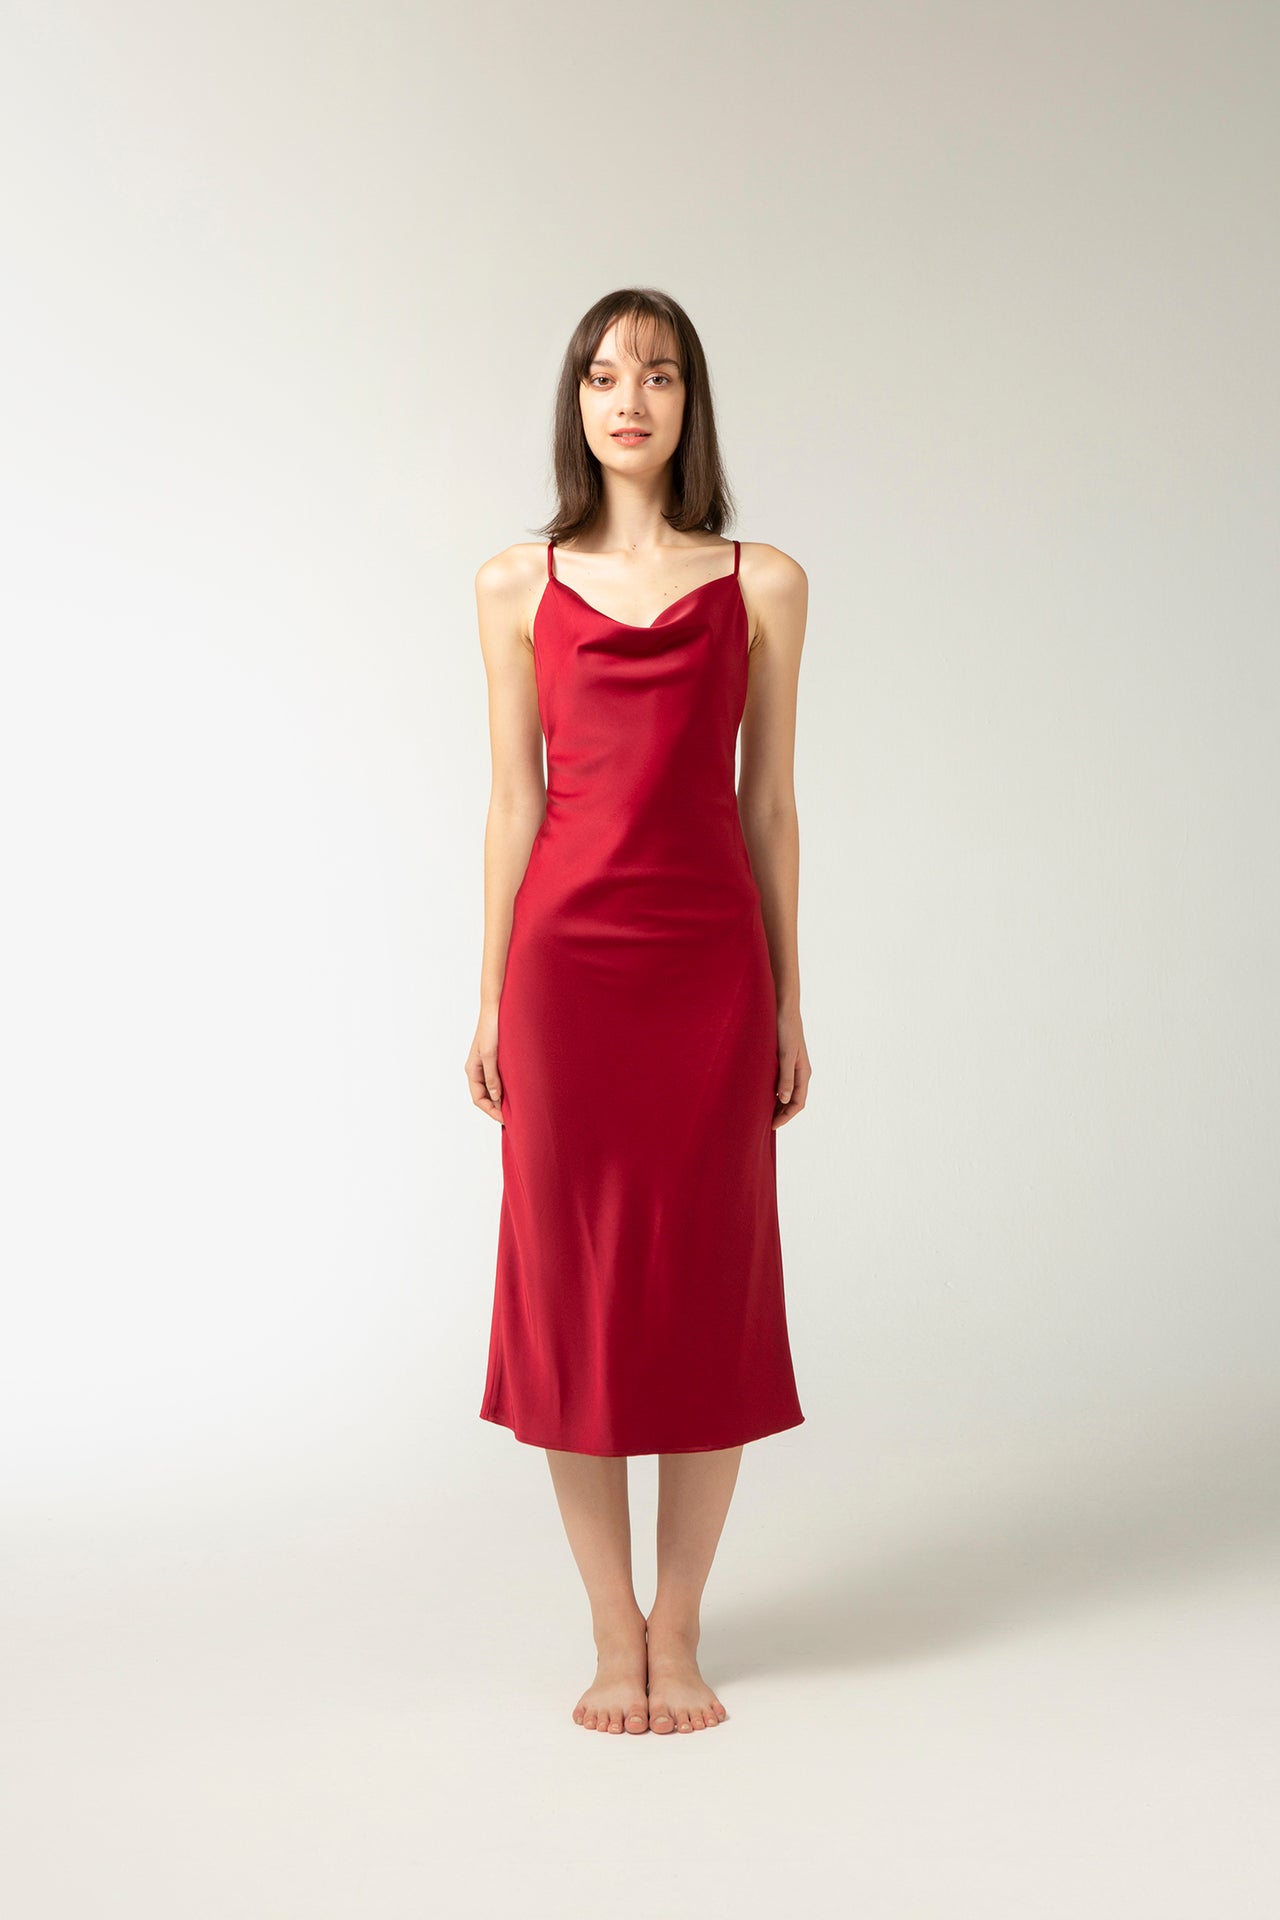 PAIGE Dress In Cherry